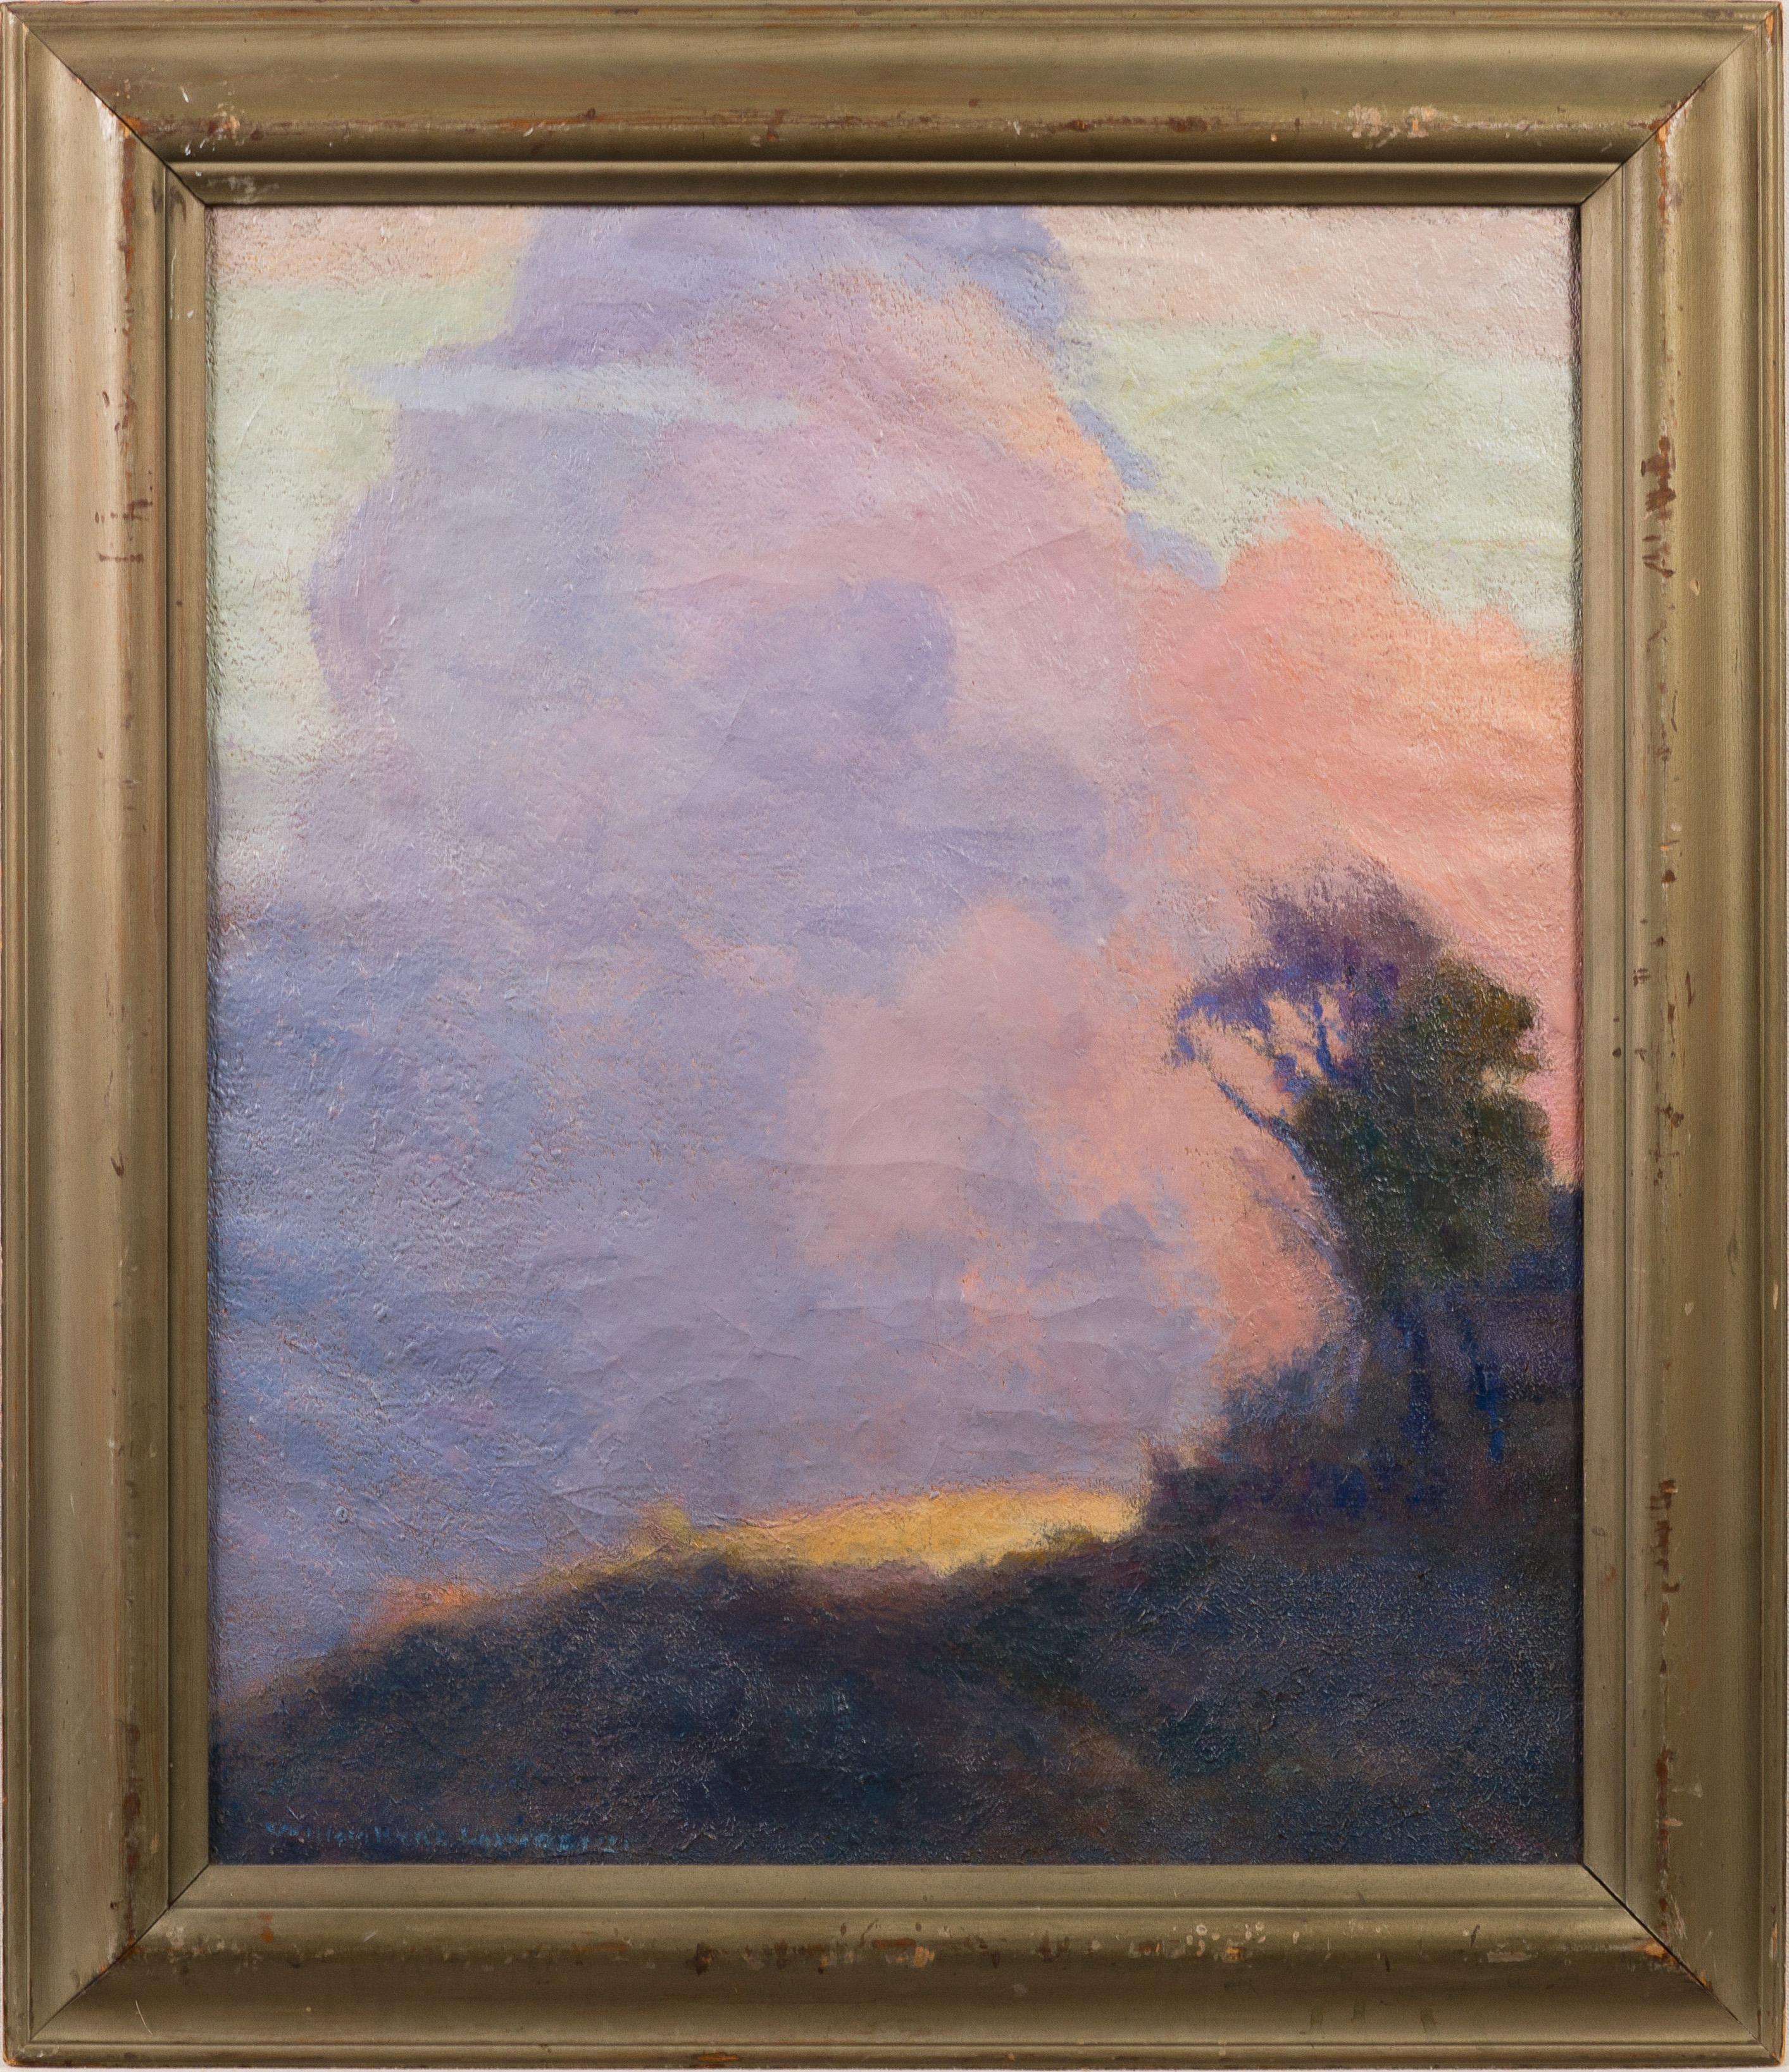 William Hurd Lawrence  Abstract Painting - Antique American Impressionist Cloud Study Sunset New Hampshire Landscape Oil